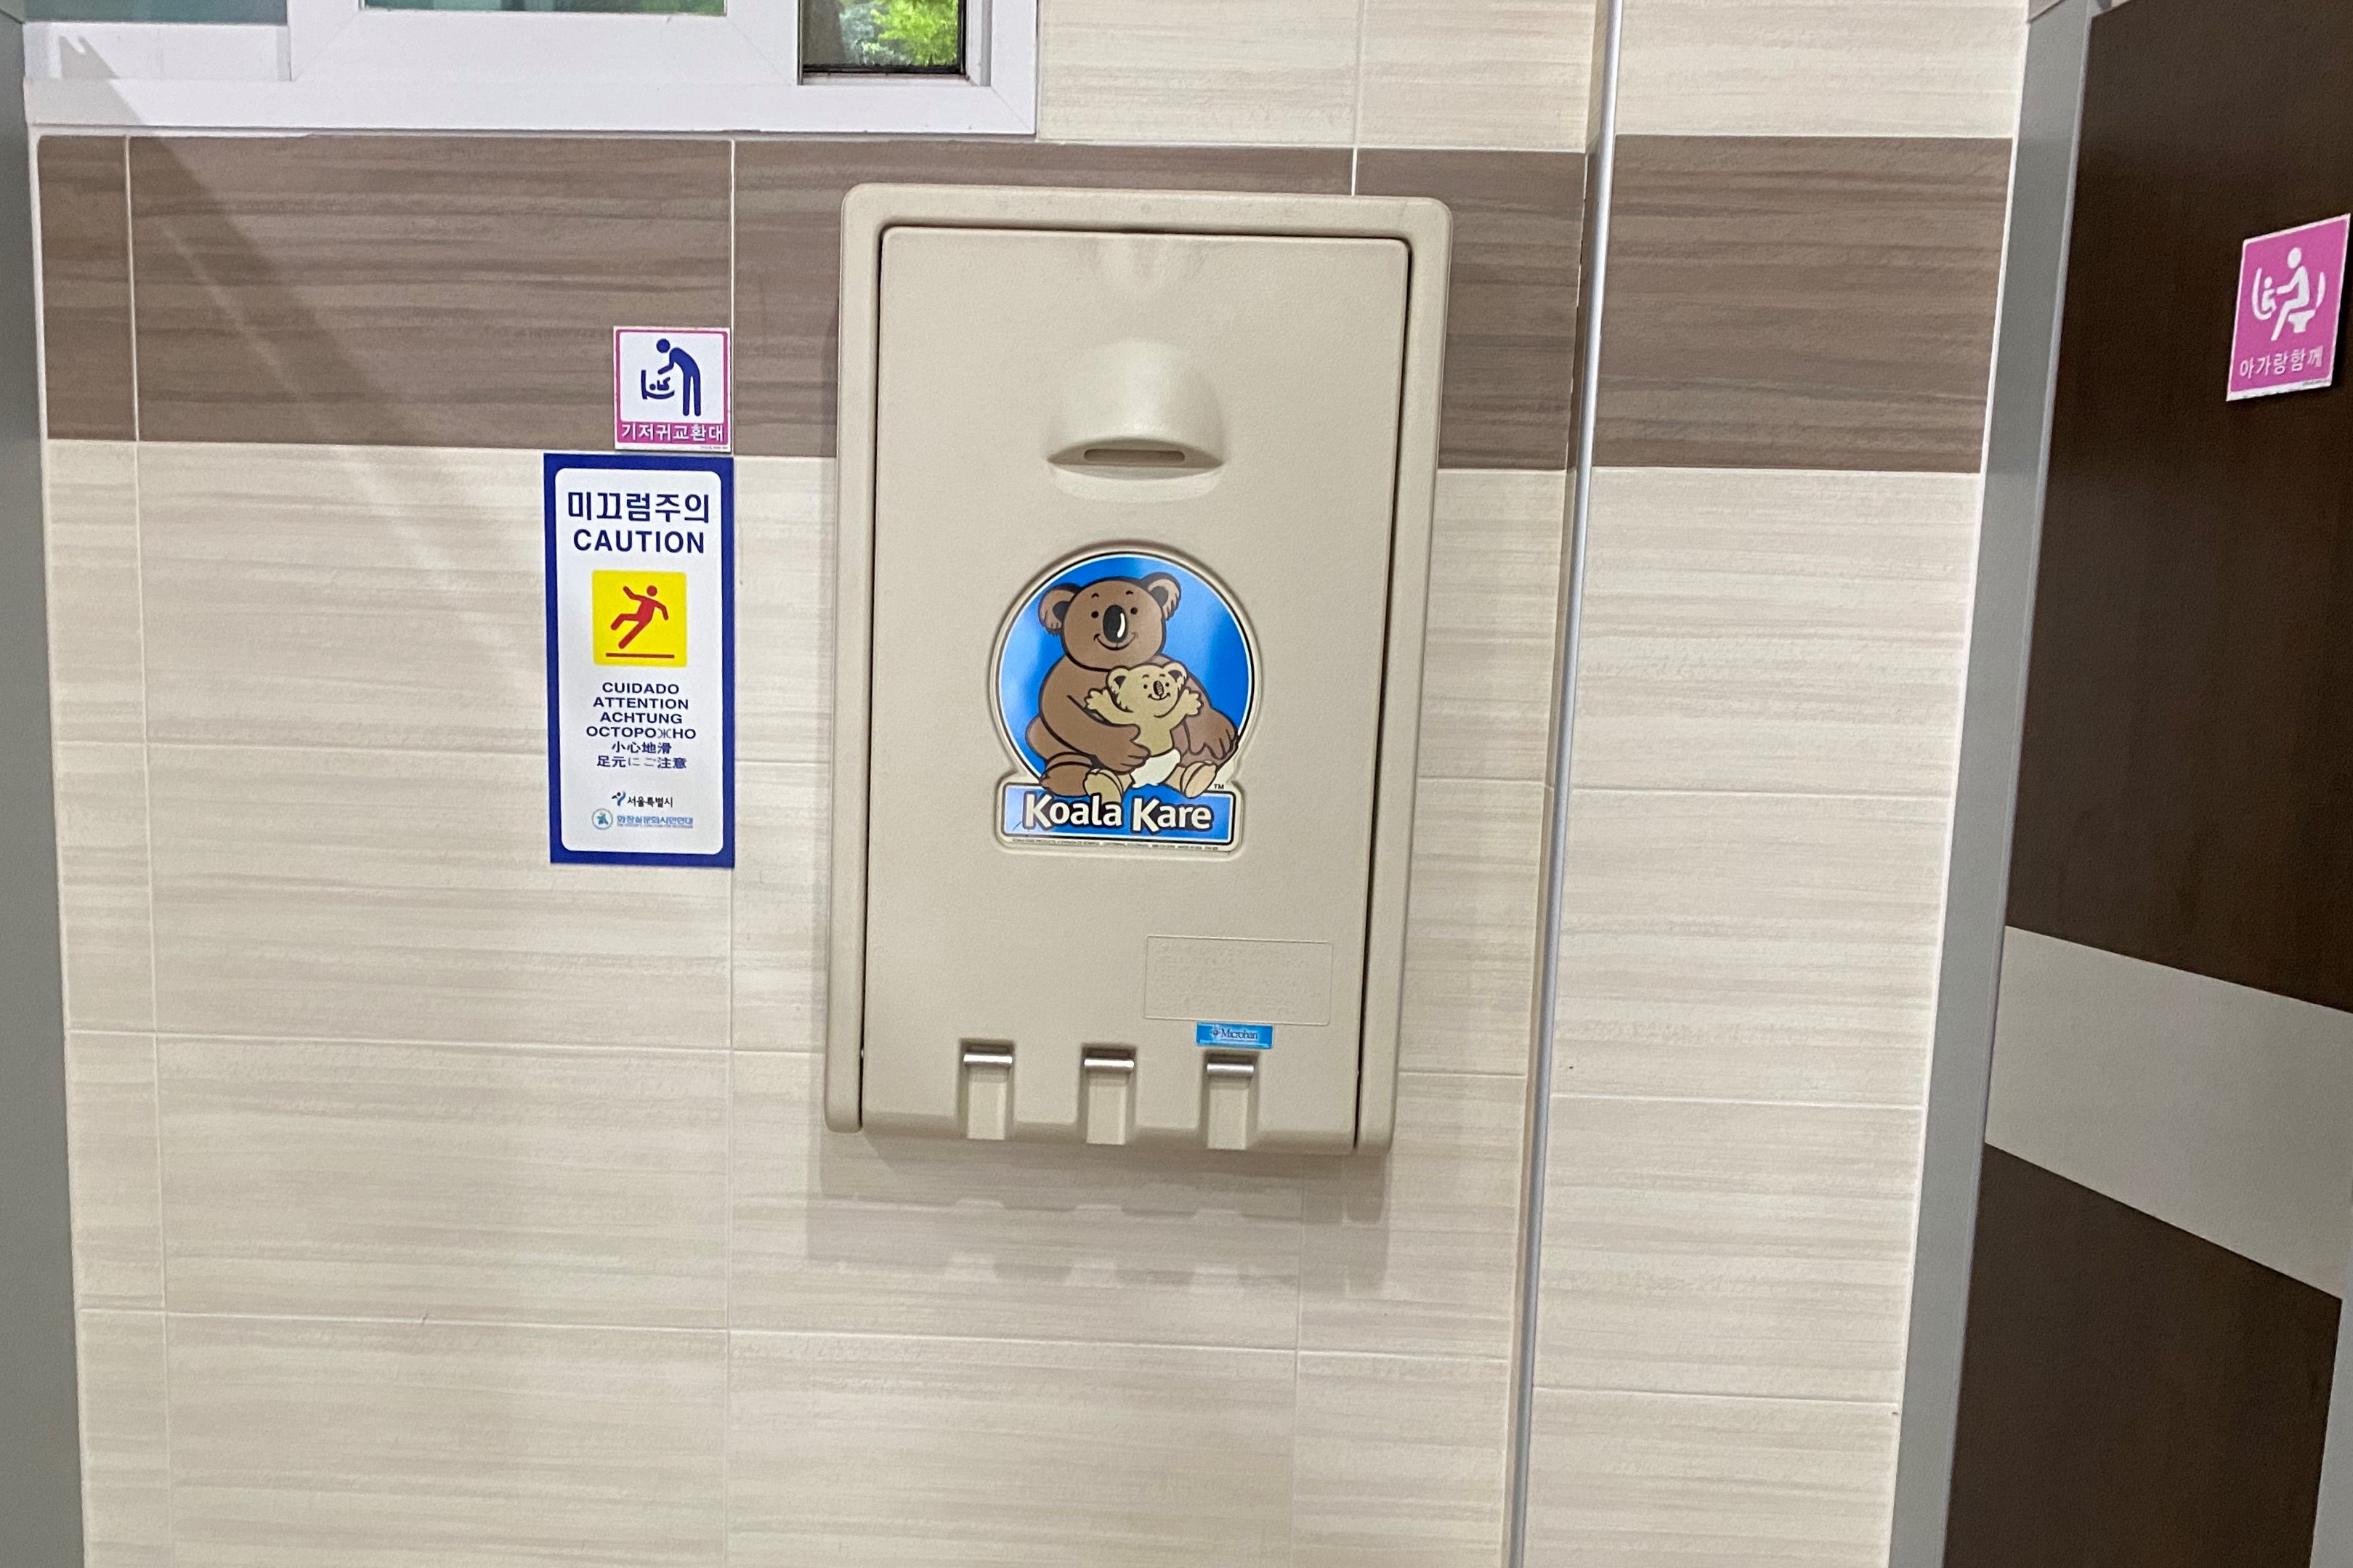 Facilities for pregnant women or families with children0 : Diaper changing station installed inside of the nursing room in Nakseoungdae Park